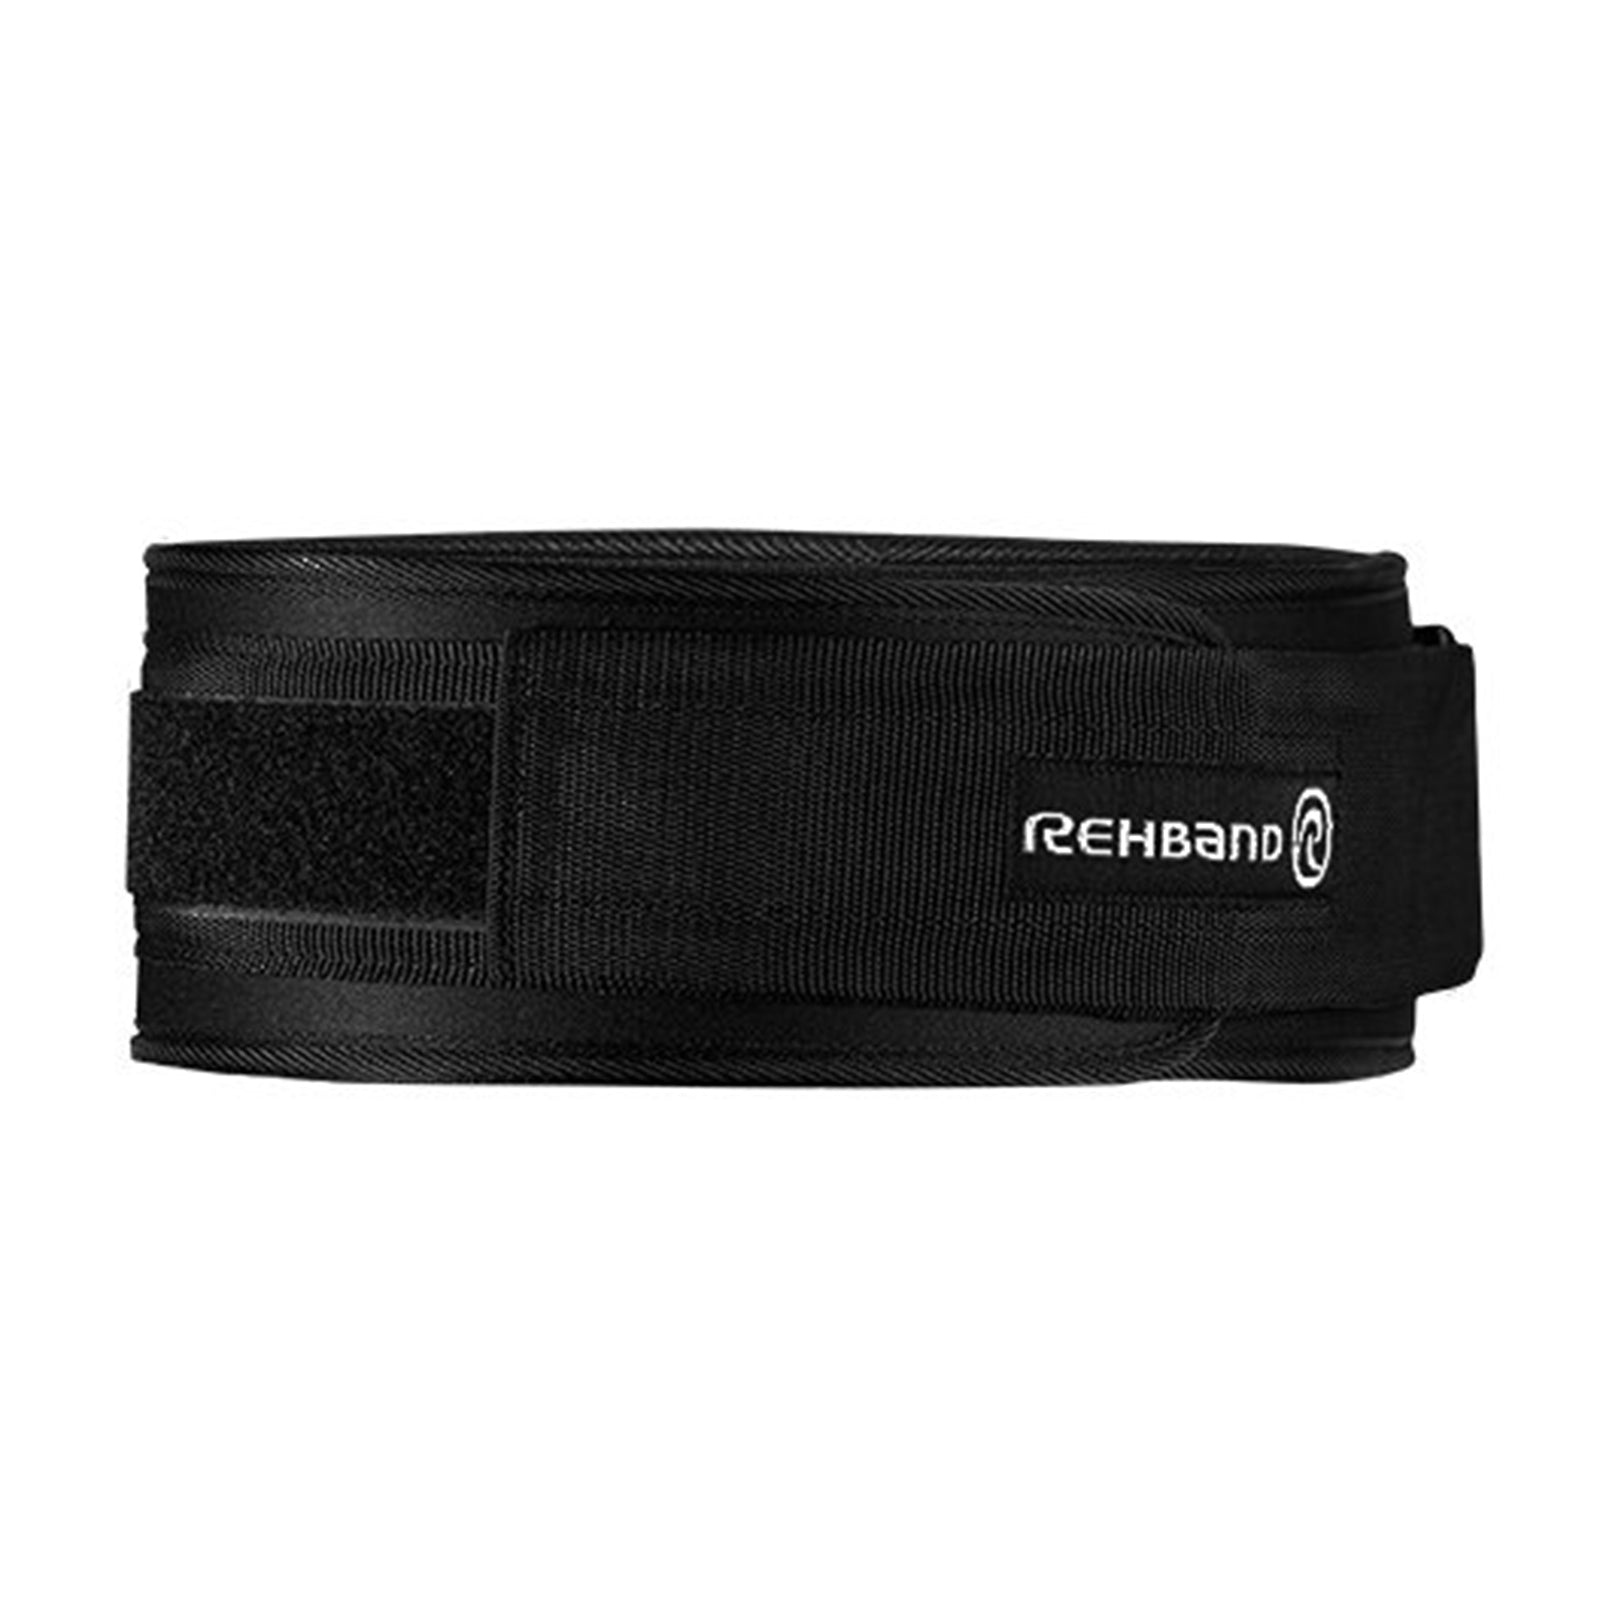 A black lifting belt with a adjuster and a Rehband logo on it